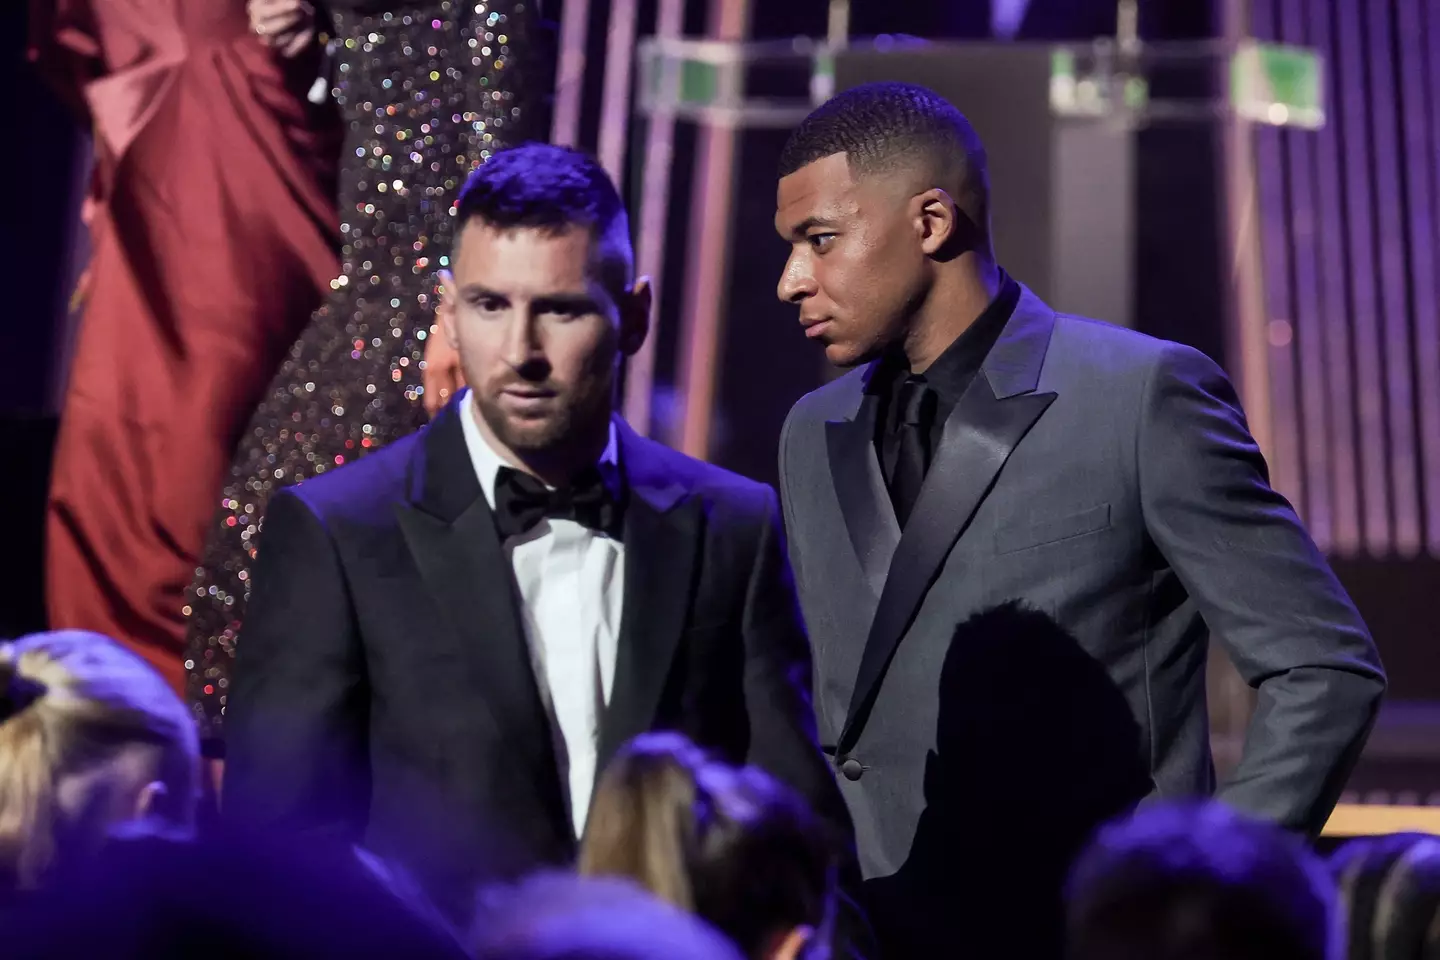 Mbappe and Messi at the Ballon d'Or ceremony. (Image